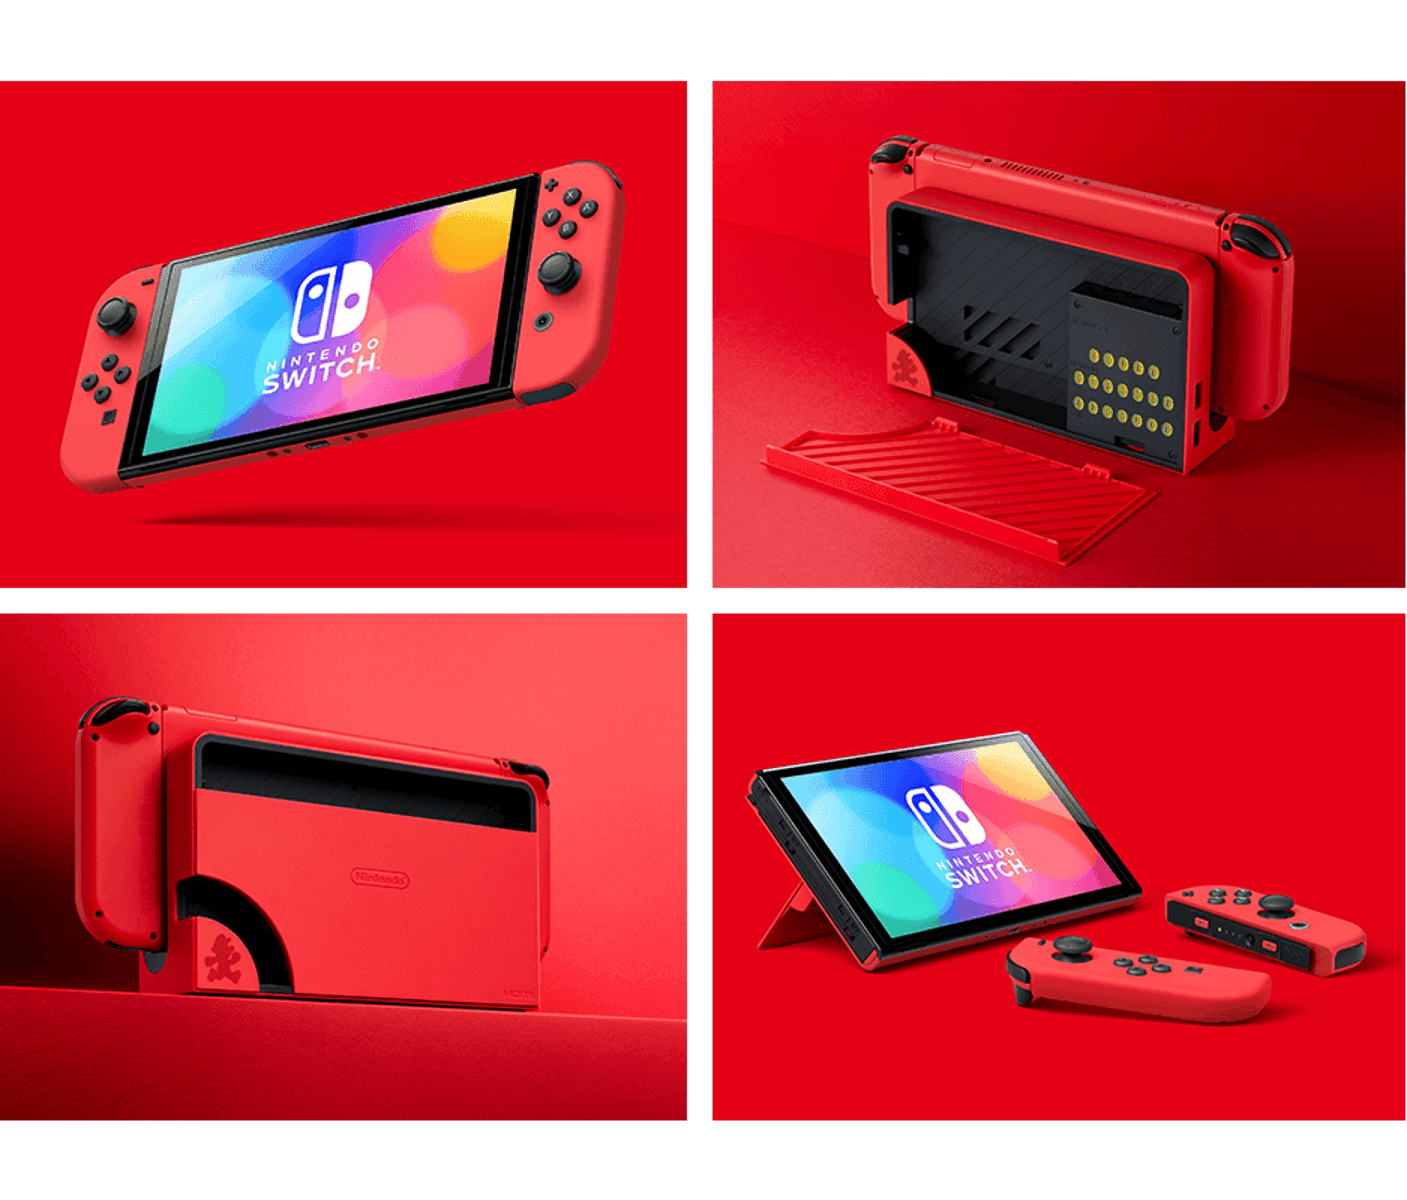 Nintendo Switch: Consoles, Games & Accessories